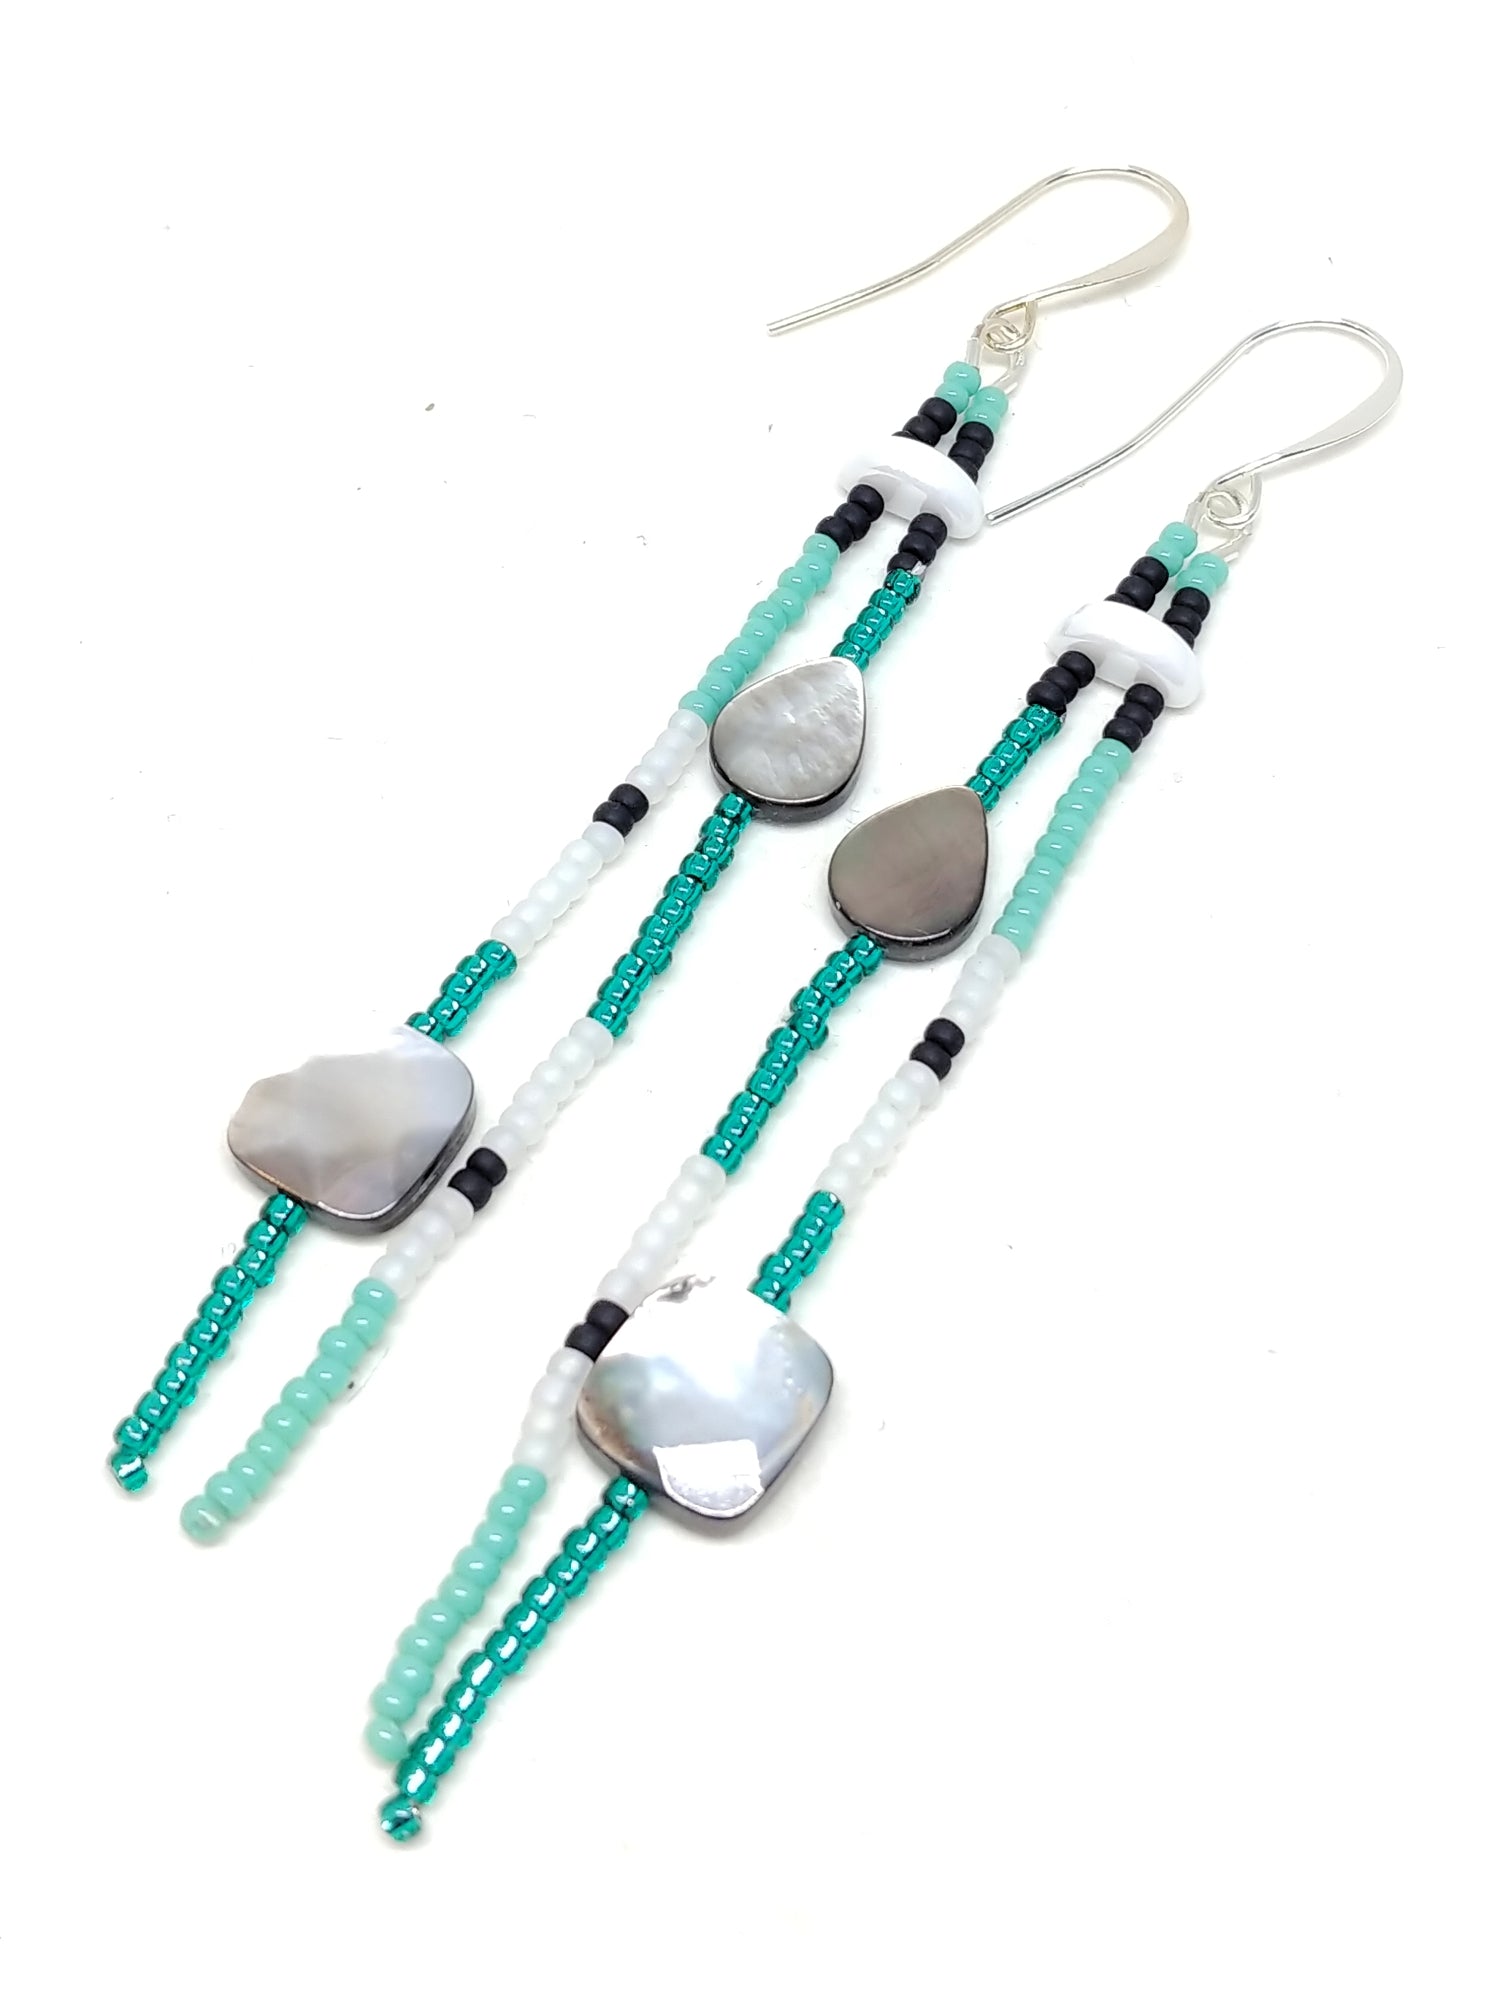 Energy dangles: silver plated, featuring black lip mother of pearl, and seed beads in turquoise, black, white and emerald.